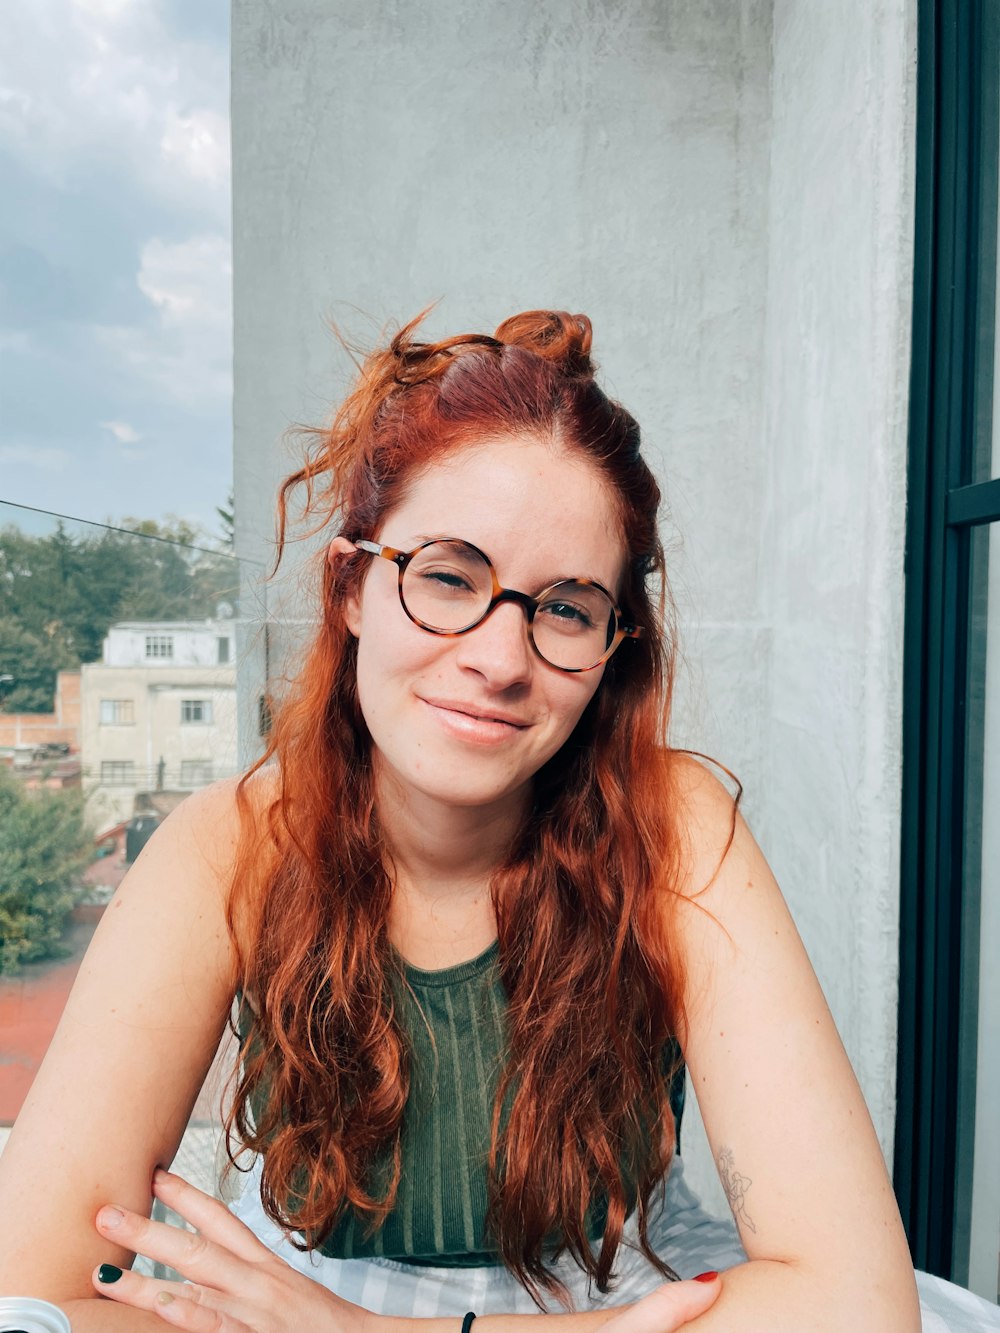 a woman with red hair and glasses